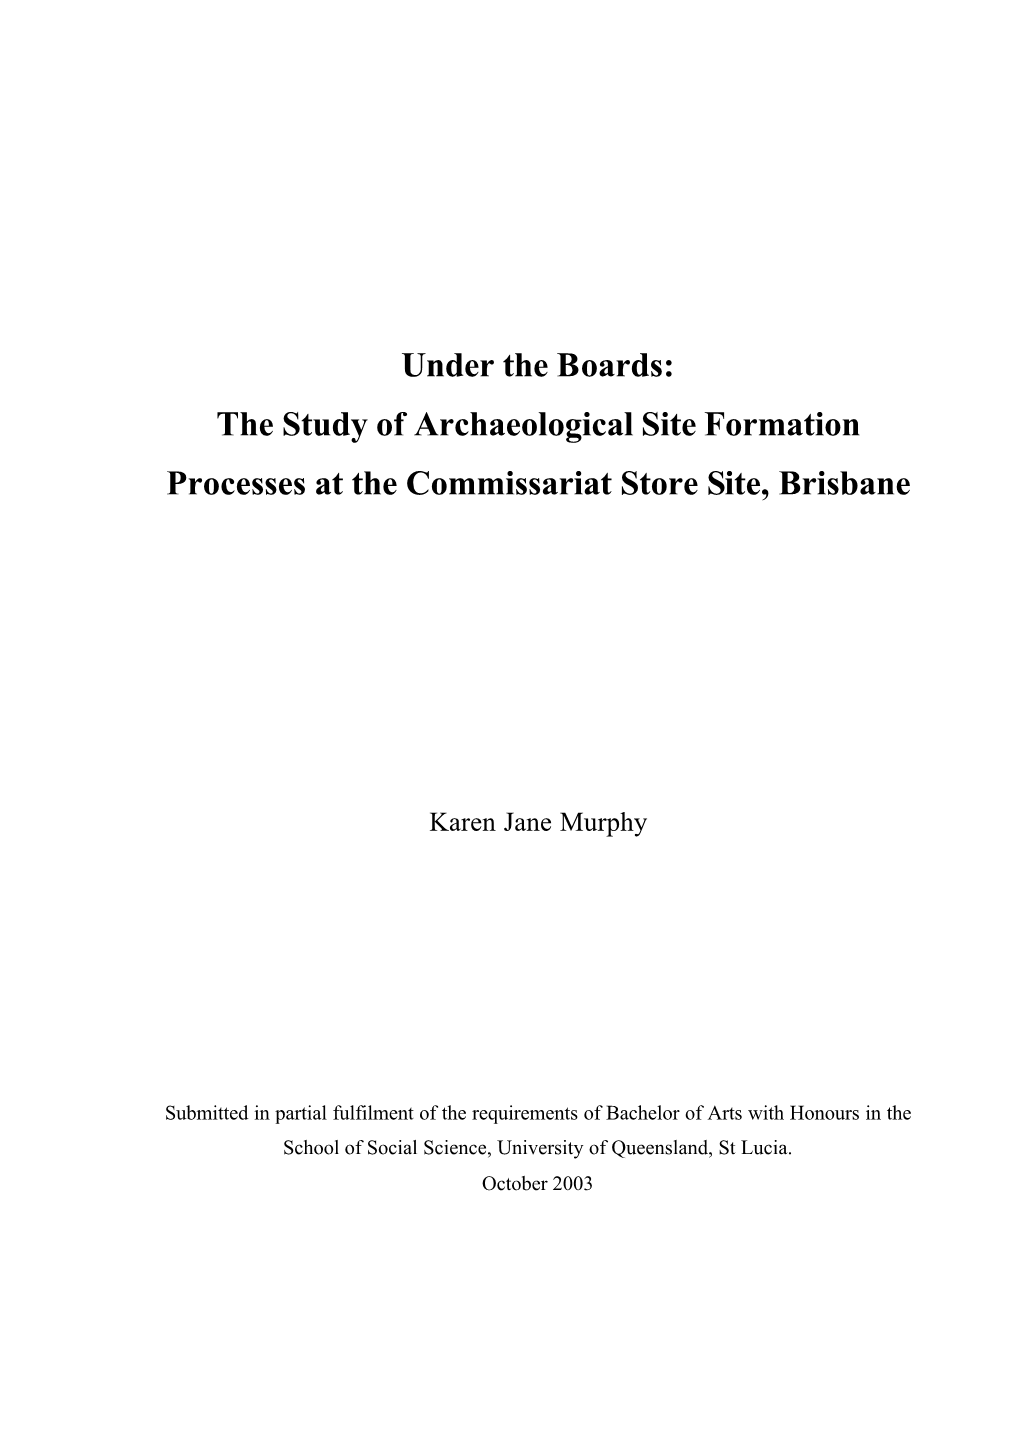 The Study of Archaeological Site Formation Processes at the Commissariat Store Site, Brisbane